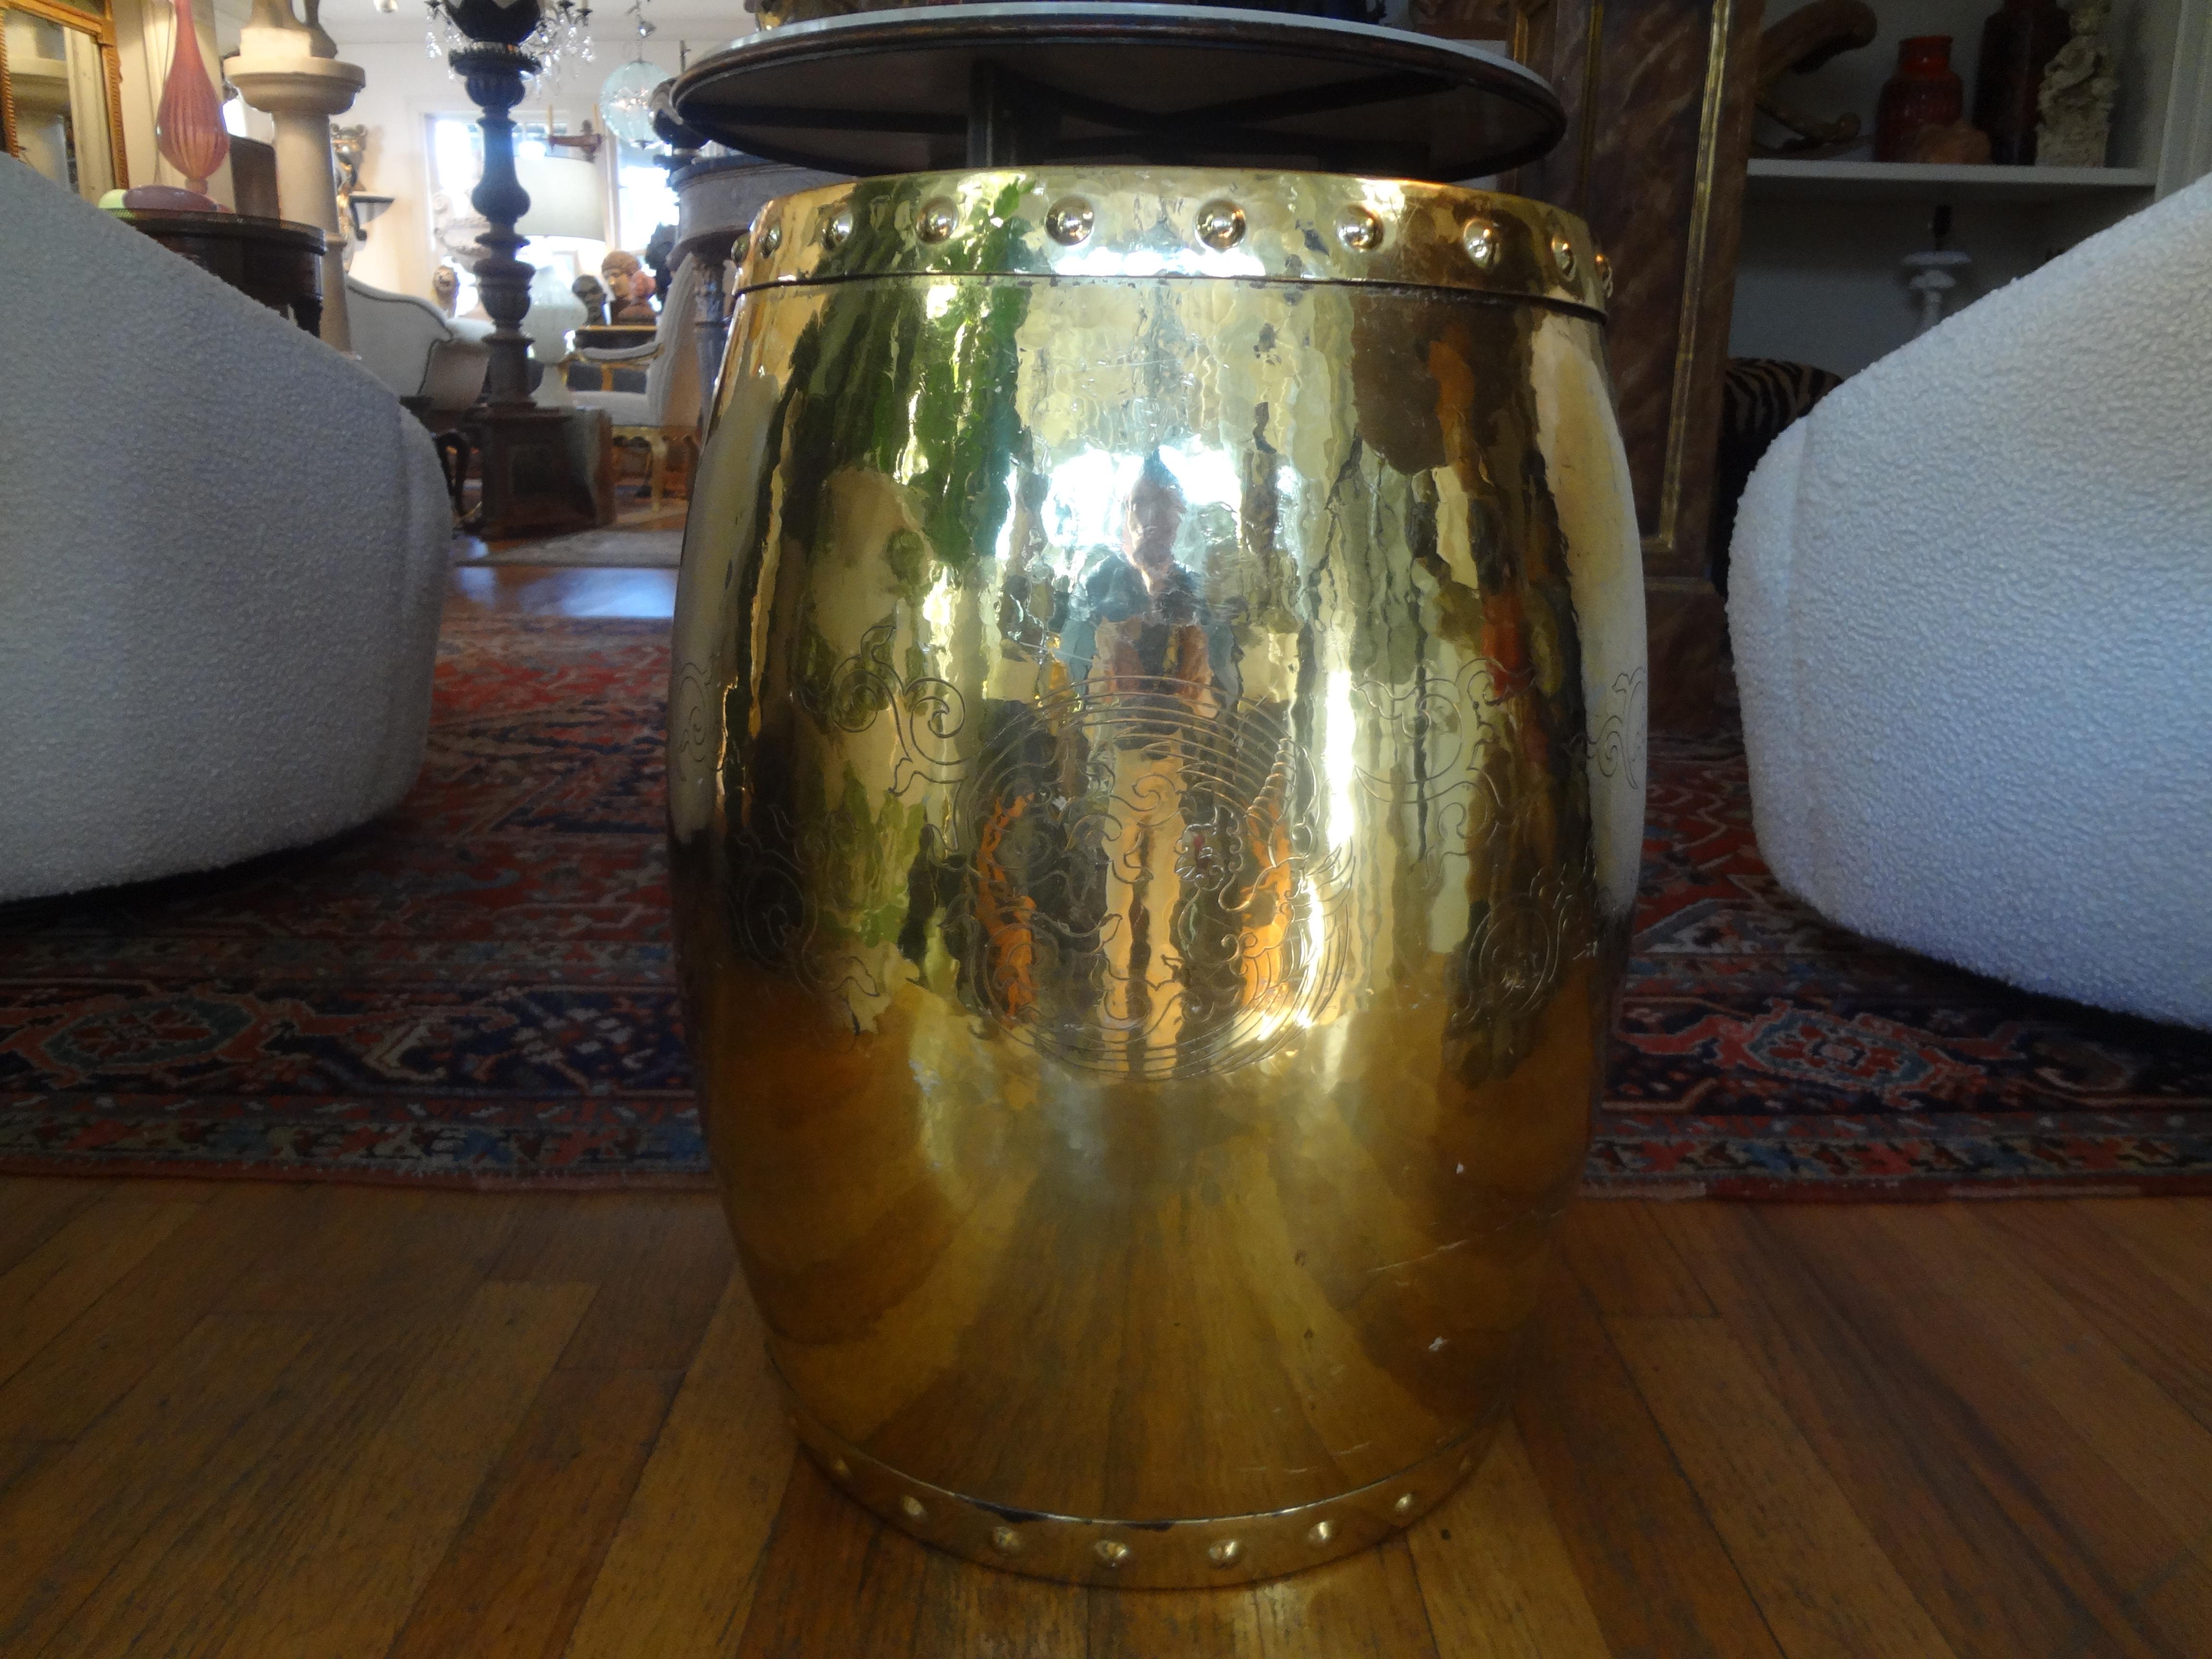 Asian Modern brass table or garden seat. This stunning Chinese midcentury polished brass Hollywood Regency garden seat has a decorative etched design and a removable lid for storage. This listing is for a single item, NOT a pair.